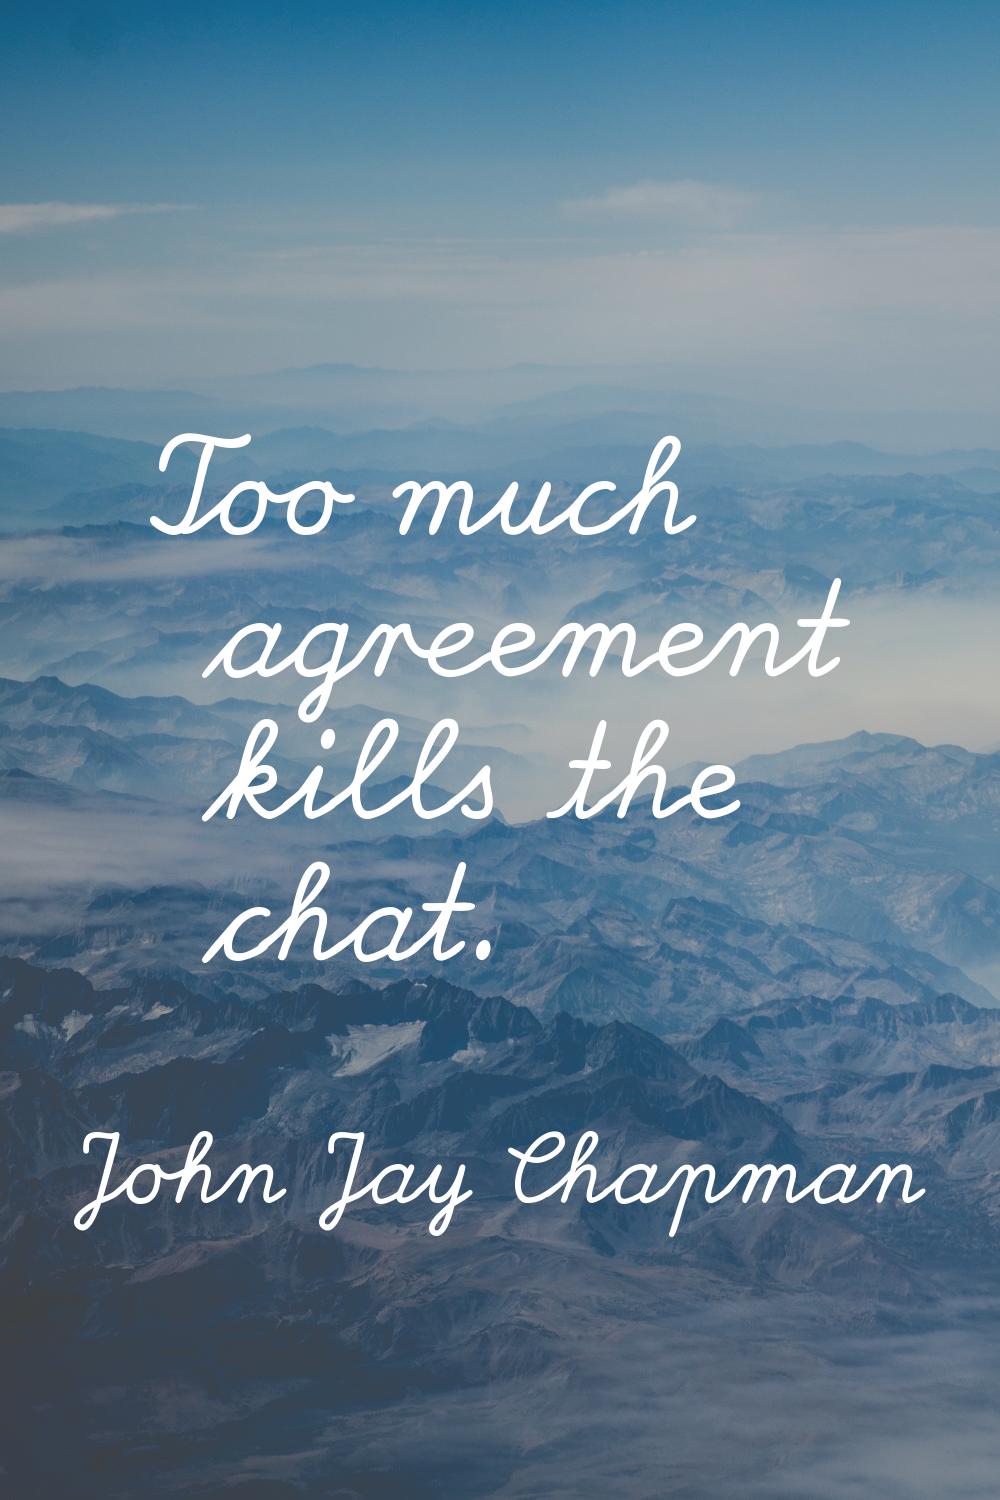 Too much agreement kills the chat.